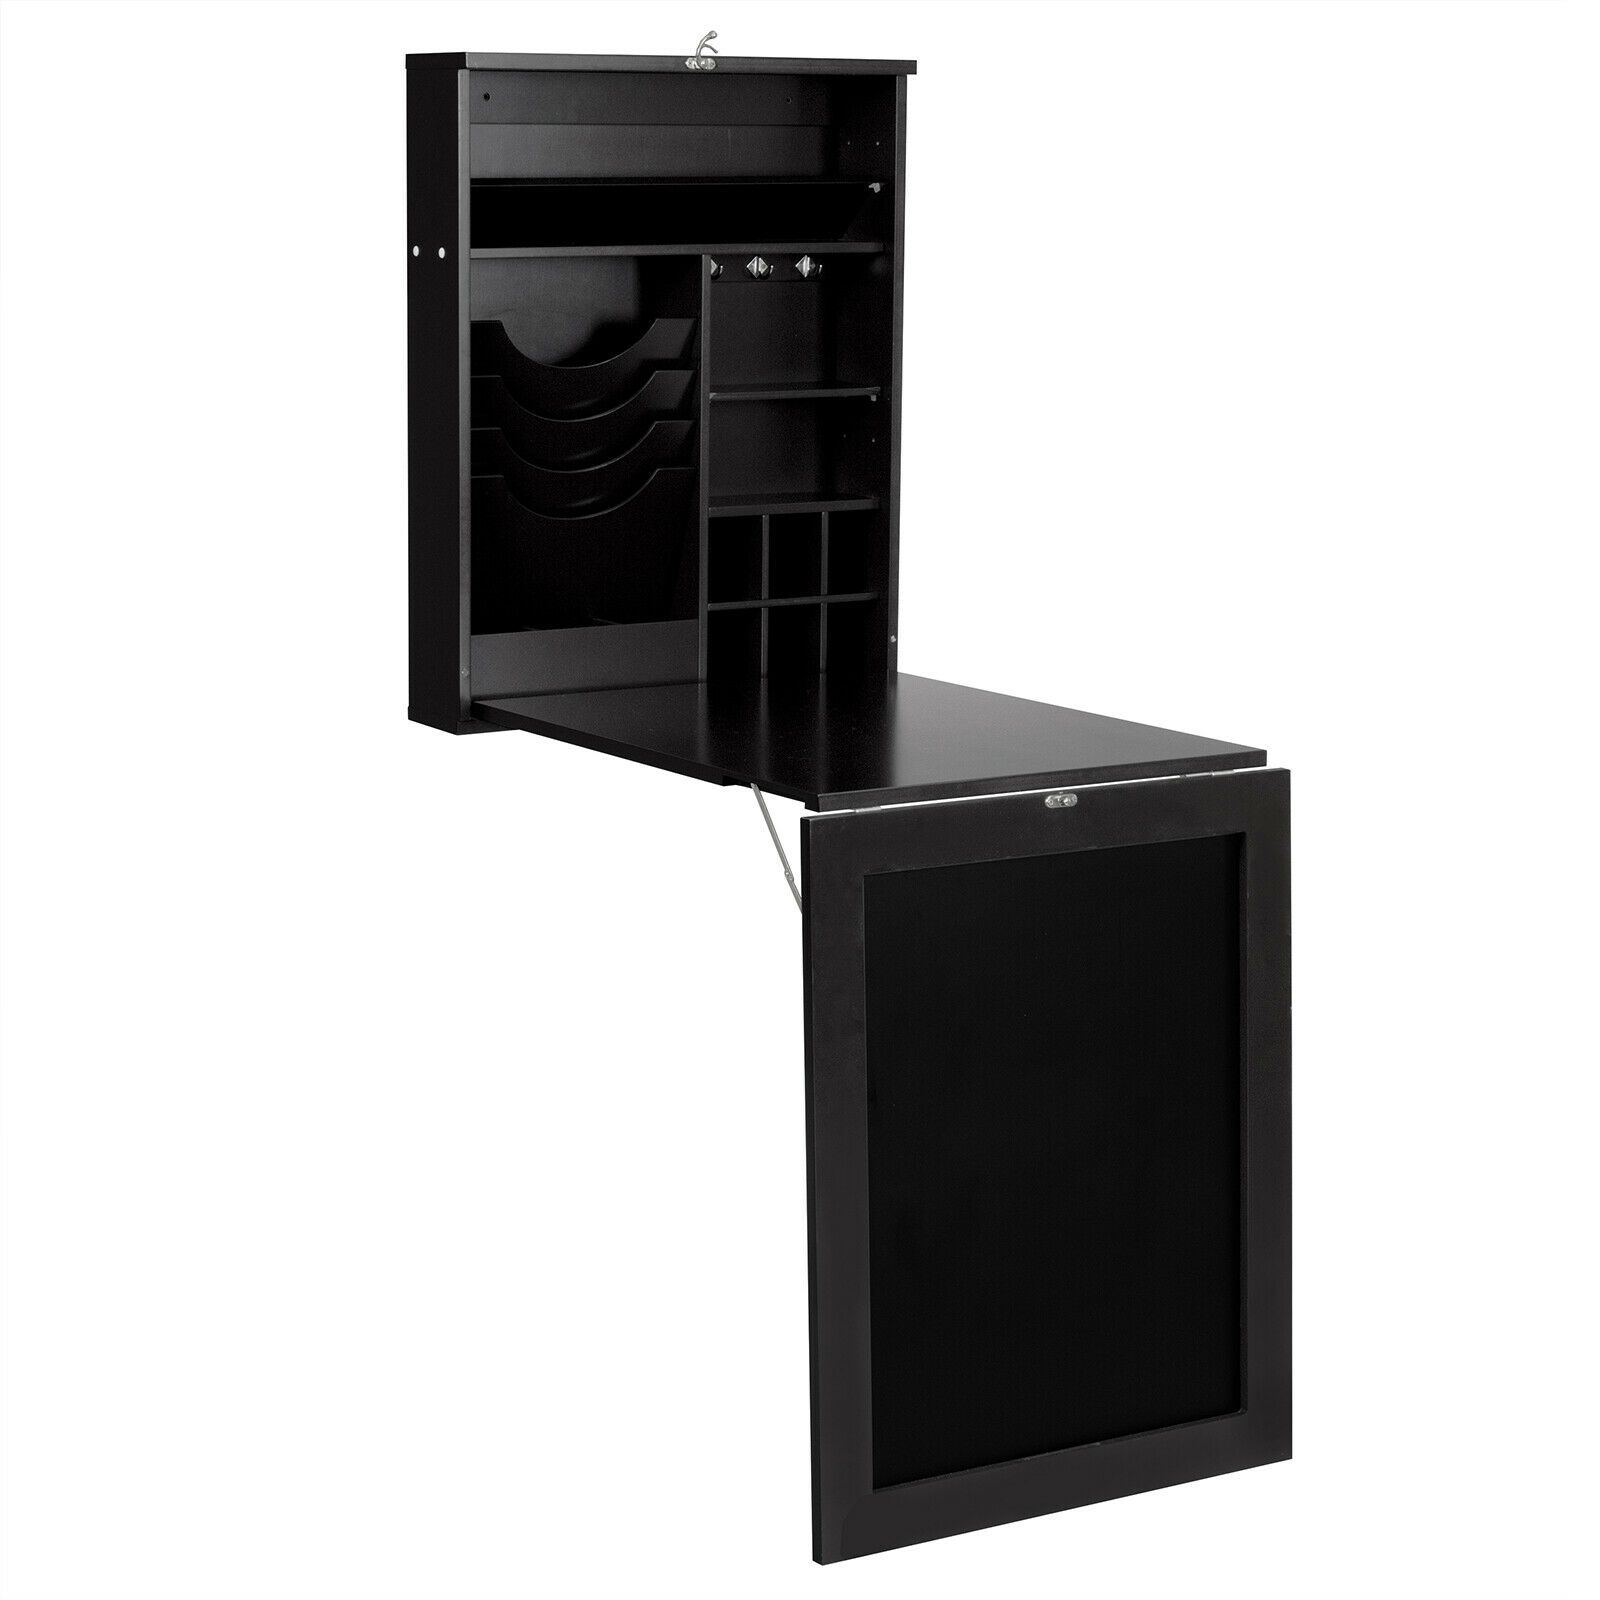 Multi-Function Folding Wall-Mounted Drop-Leaf Table with Chalkboard Black